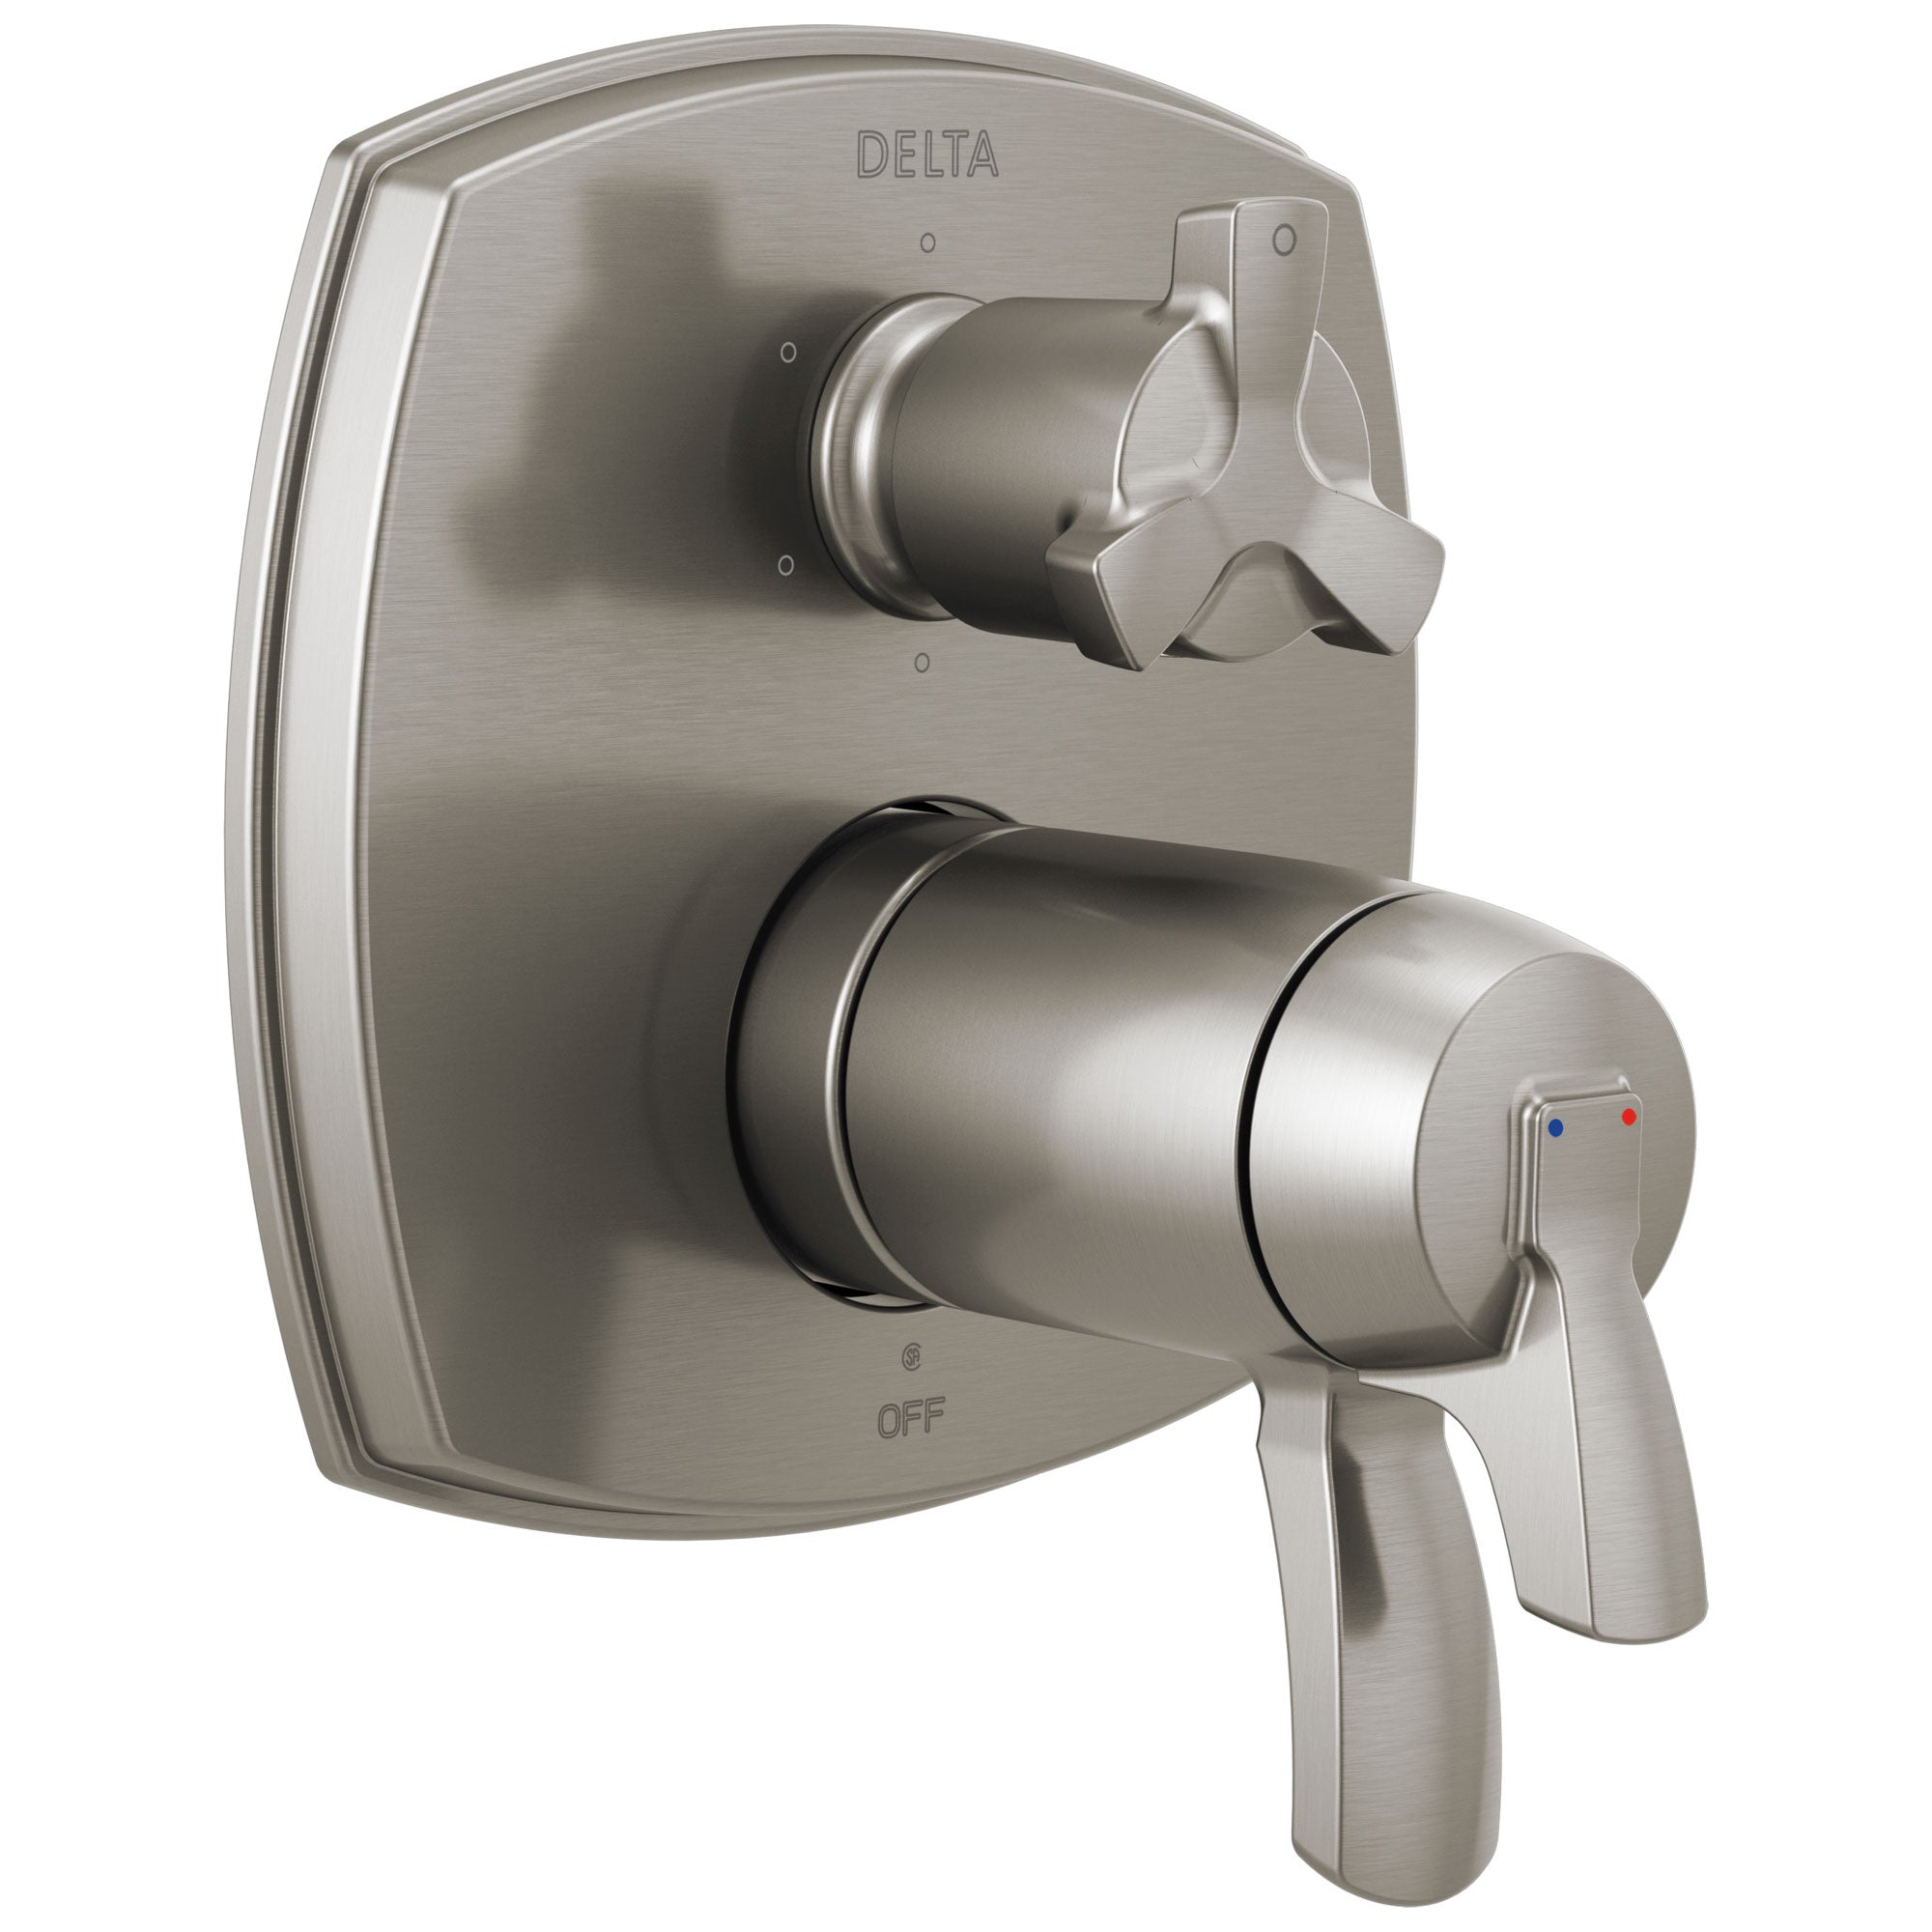 Delta Stryke Stainless Steel Finish Thermostatic Shower System Control with 6 Setting Integrated Cross Handle Diverter Includes Valve & Handles D3074V